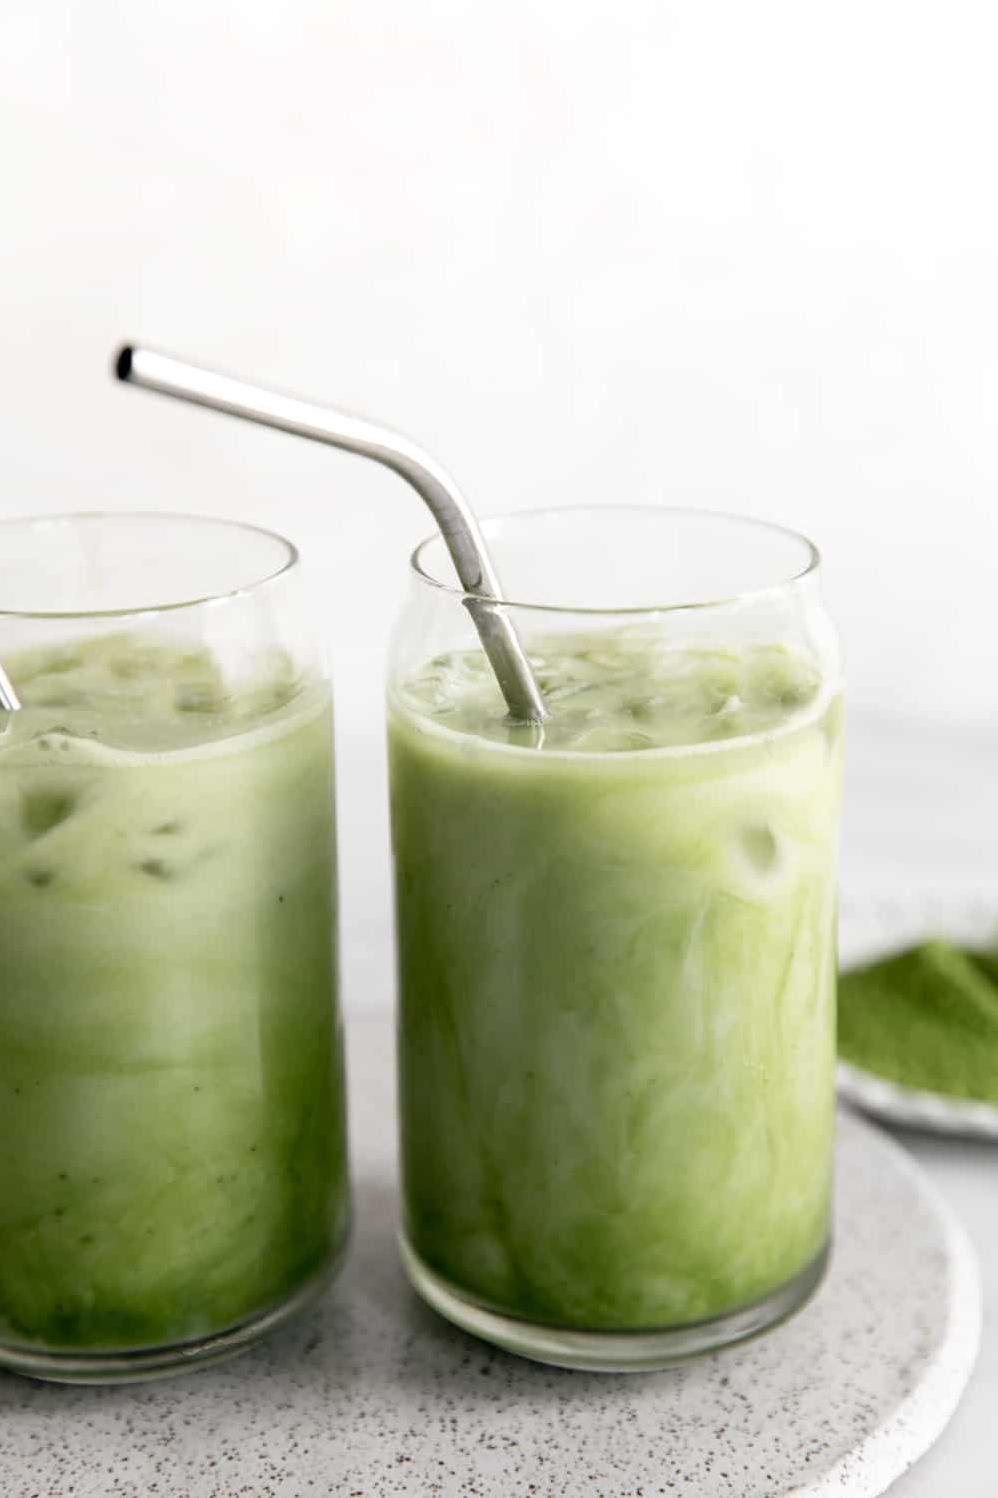  A sip of this delicious iced drink will transport you to Japan where matcha is a cultural icon